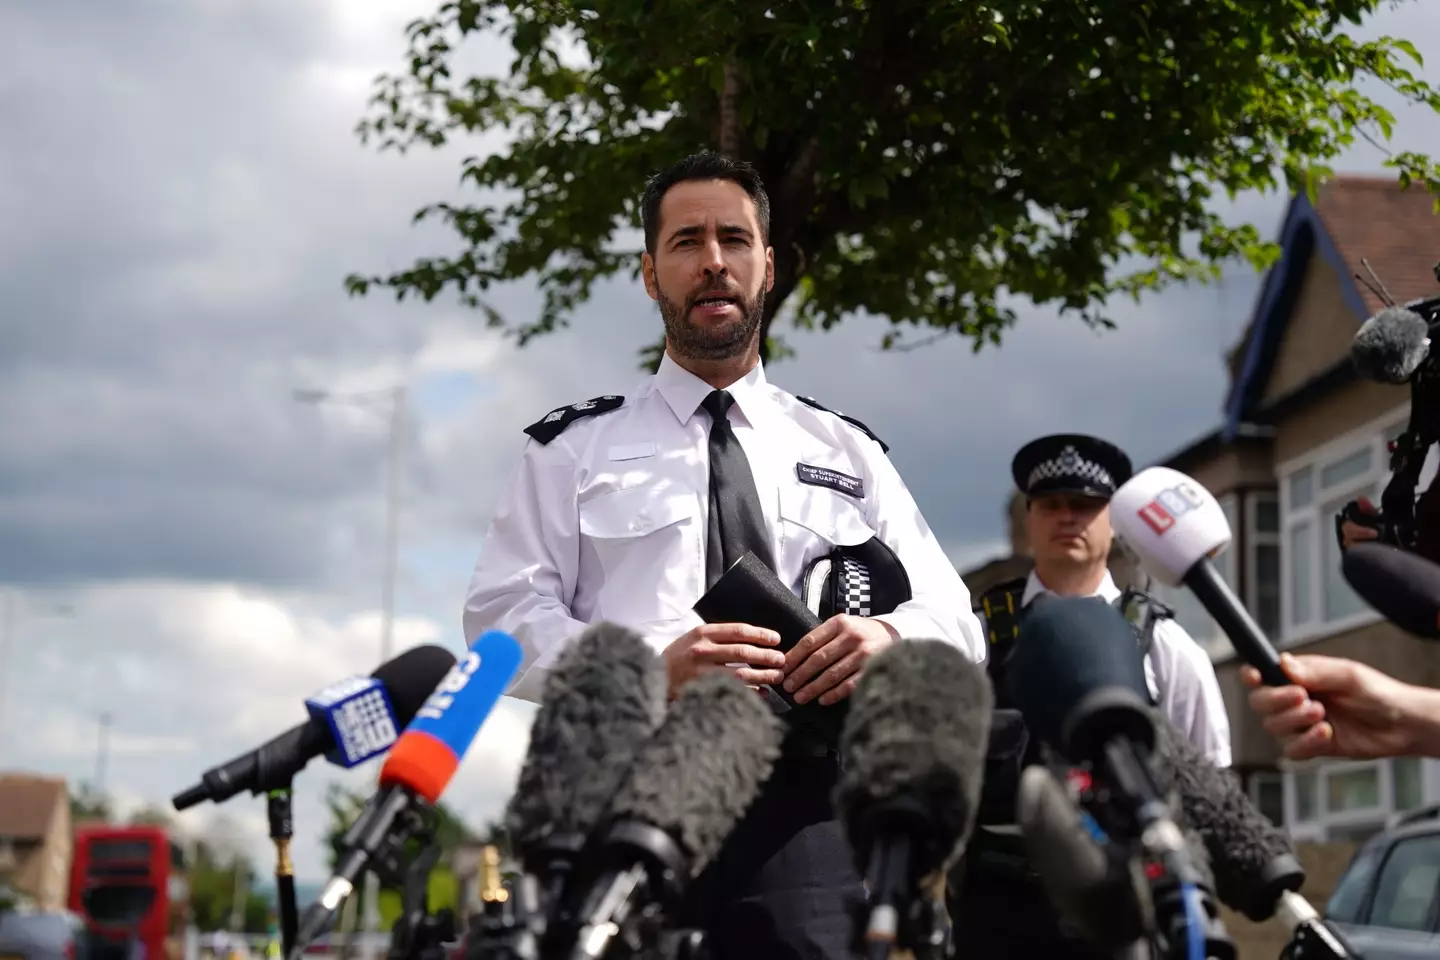 Chief Superintendent Stuart Bell said The Metropolitan Police 'will' find out why the attack occurred. (Jordan Pettitt/PA Wire)